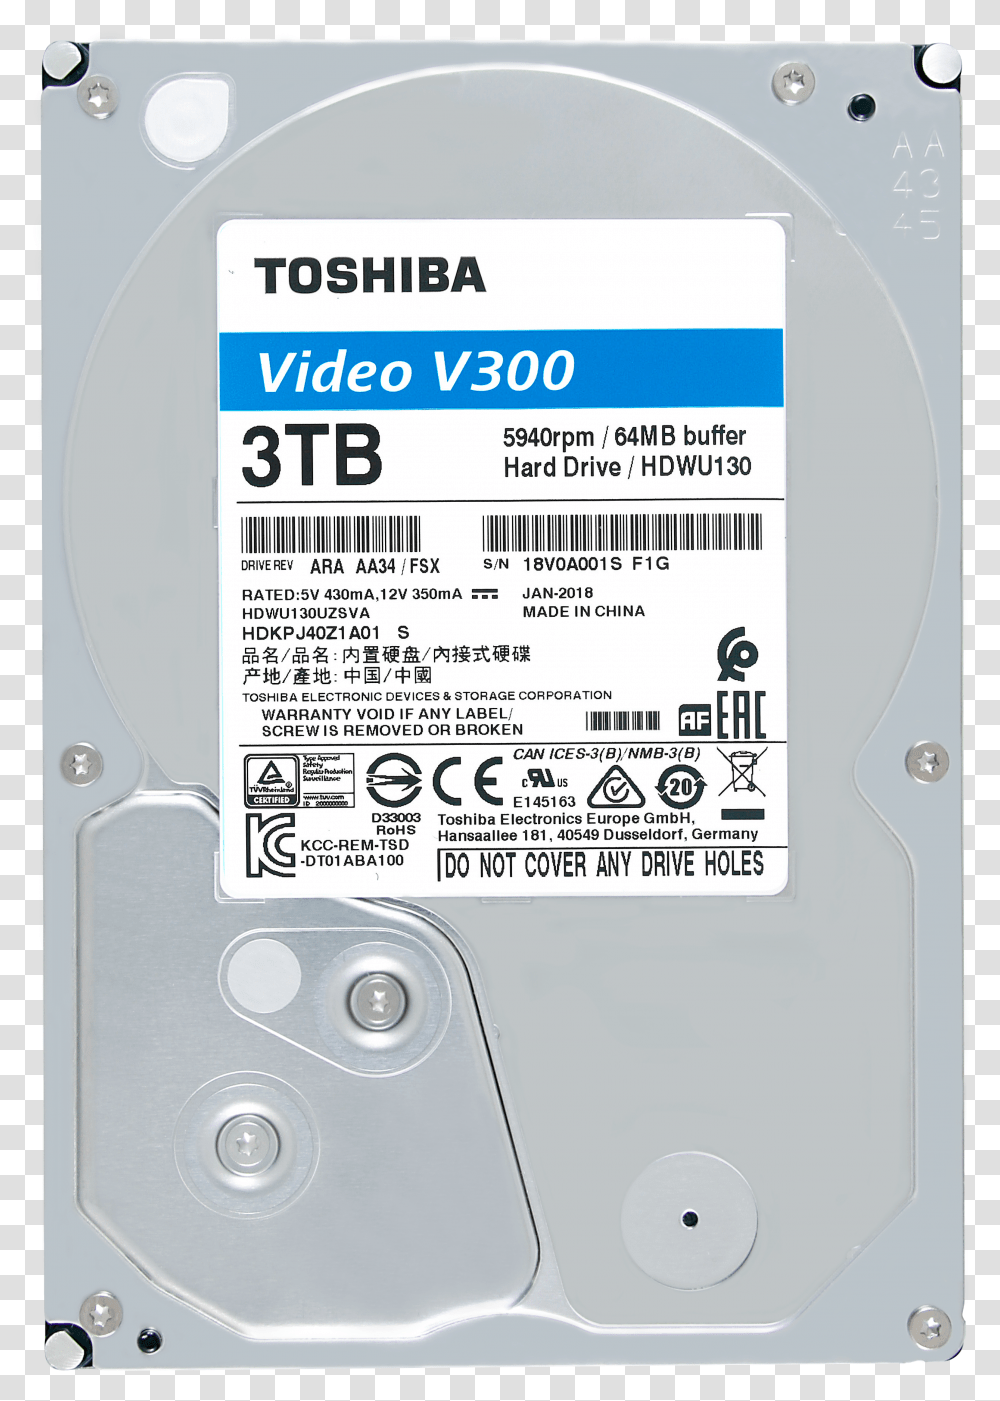 Toshiba Releases New Powerful Surveillance And Video Hdd Toshiba V300 2tb Transparent Png